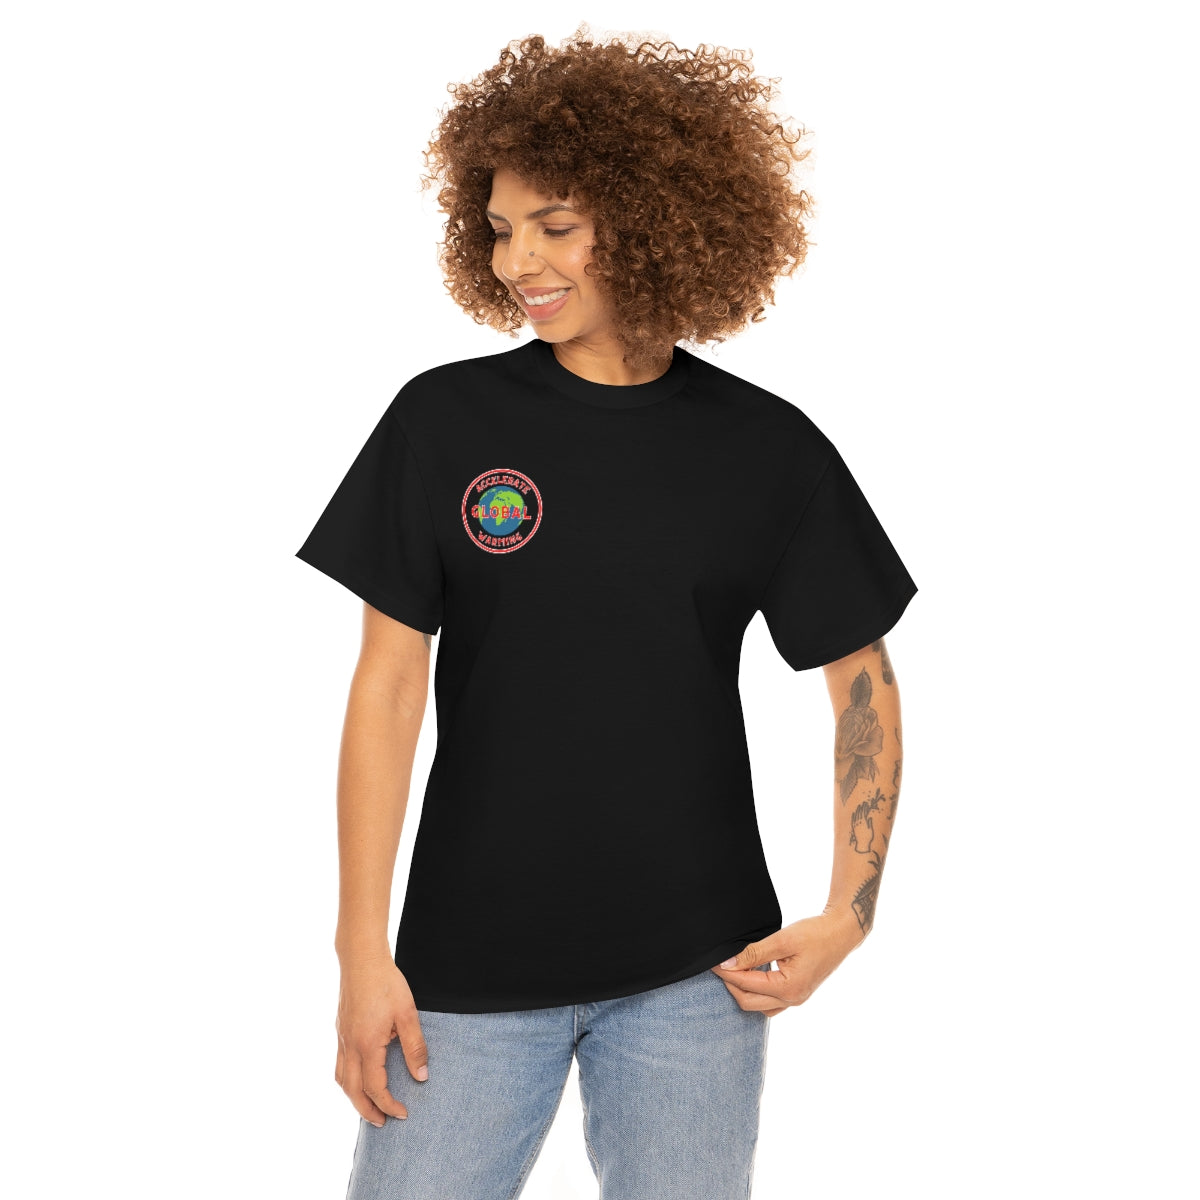 Accelerate Global Warming - Unisex Heavy Cotton Tee - Hot Take